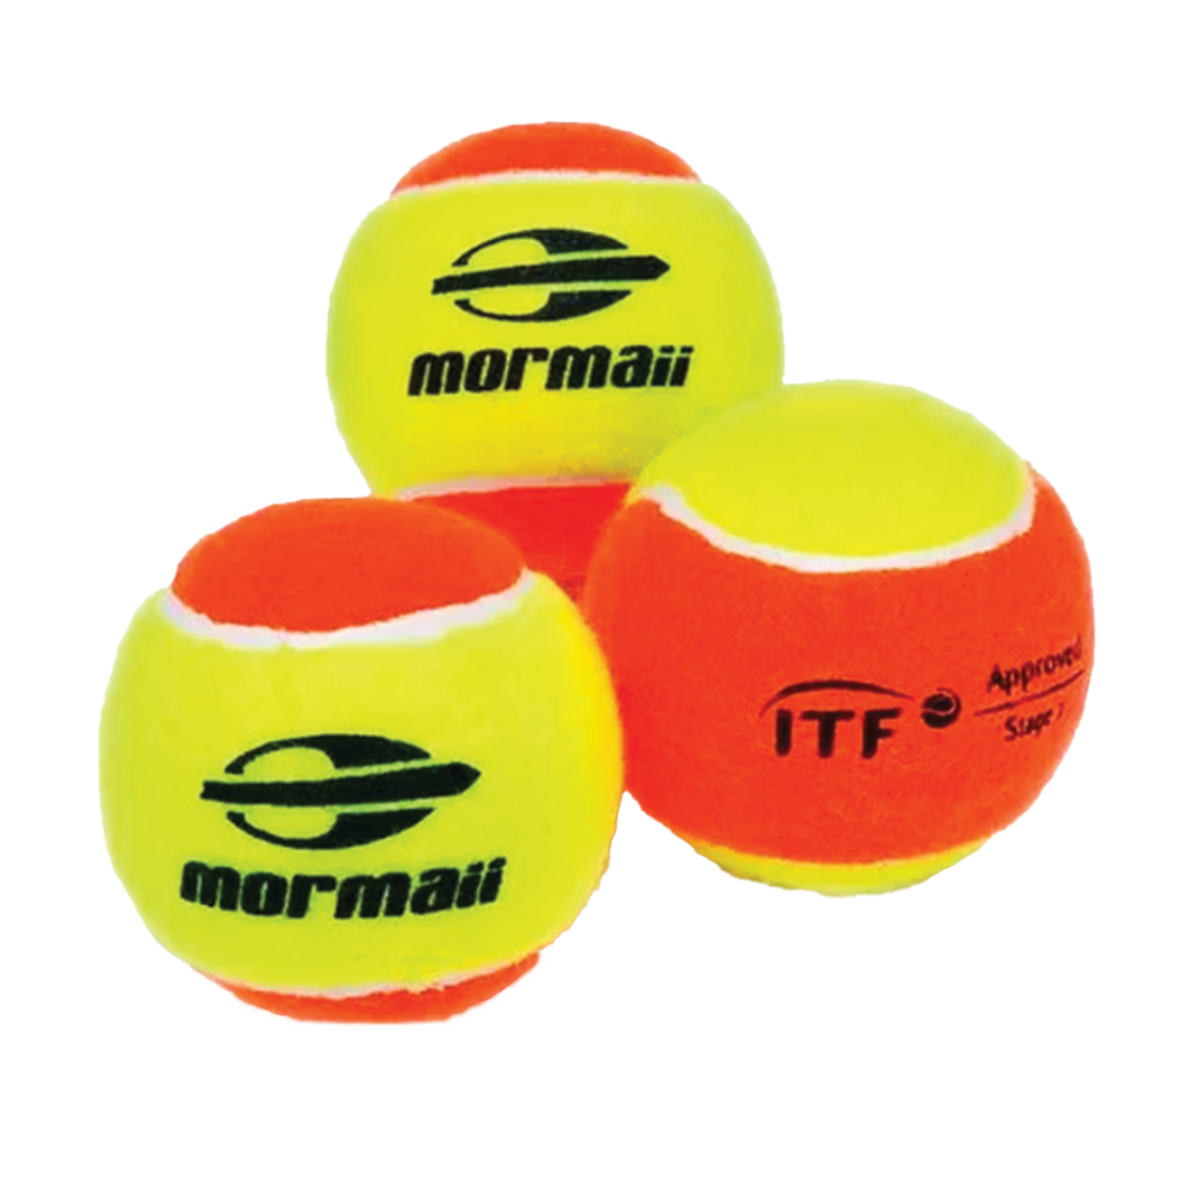 Mormaii ITF APPROVED 3 Pack